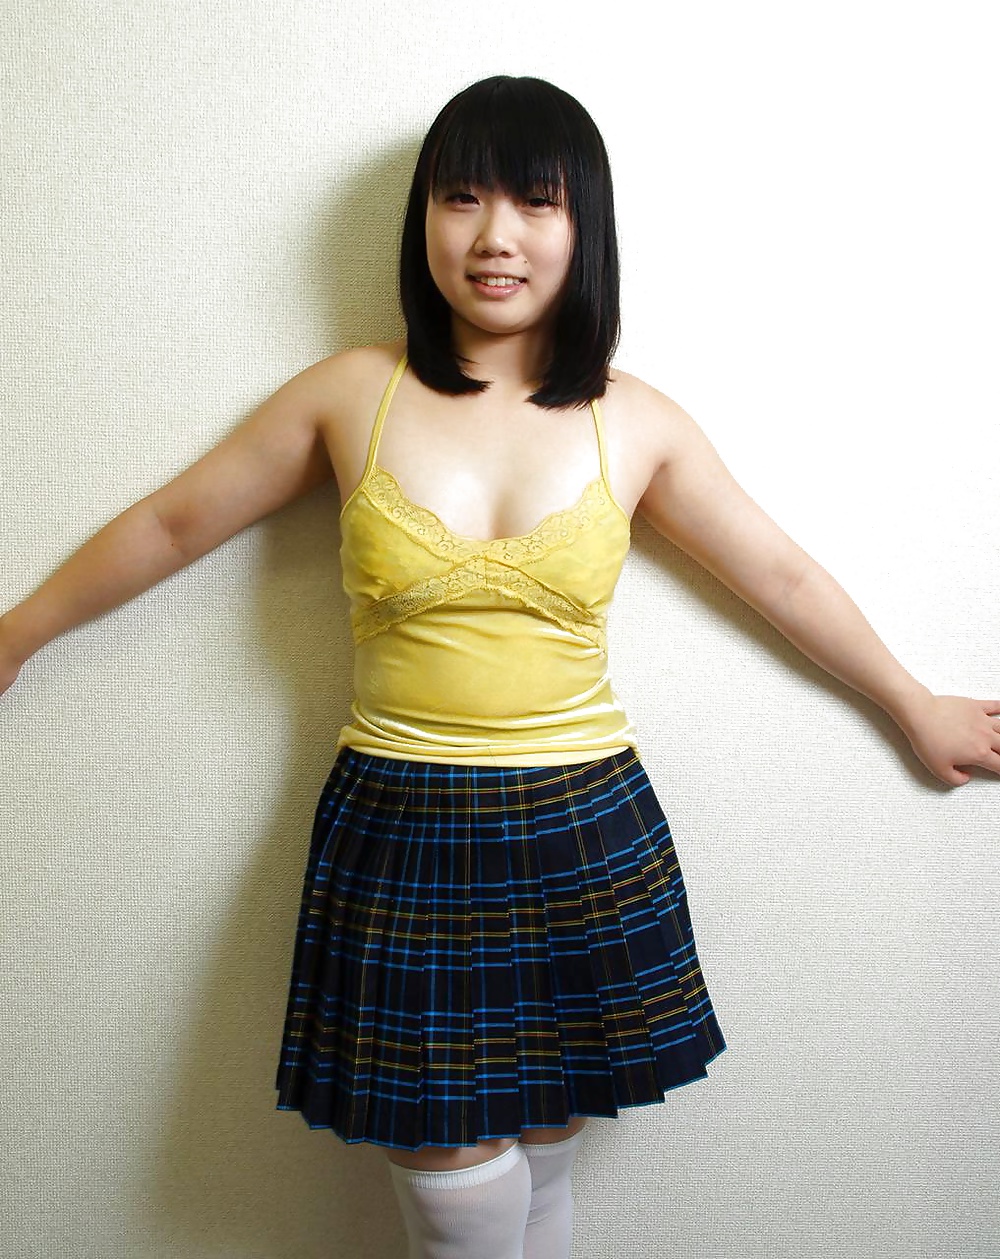 Adult archive Japan chubby daddy